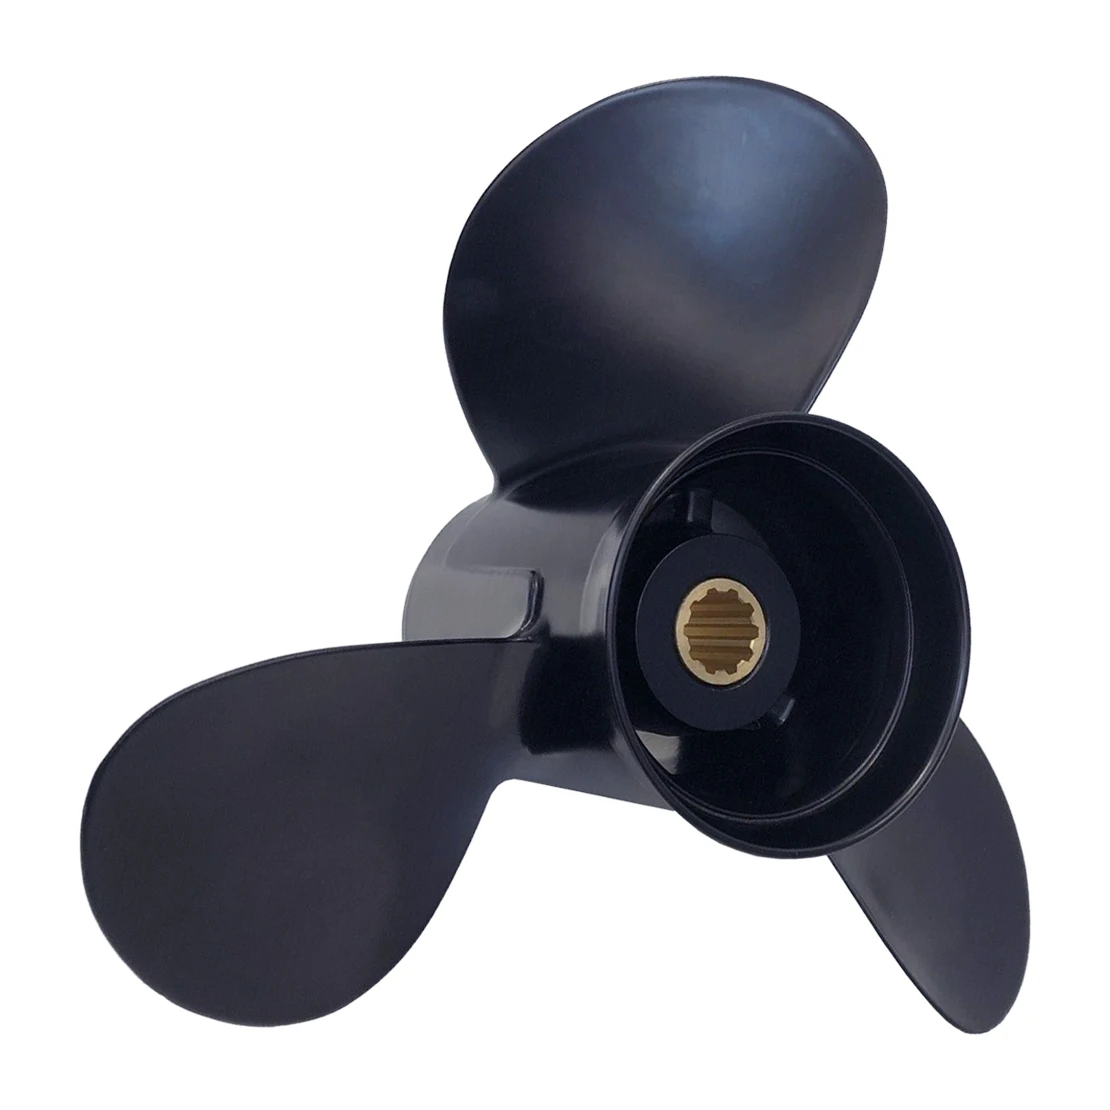 3R0B645270 Boat Propeller 48-19640A40 346-64104-5 Fit for Mercury Mariner Tohatsu Nissan Outboard 25-30HP Black Aluminum Alloy